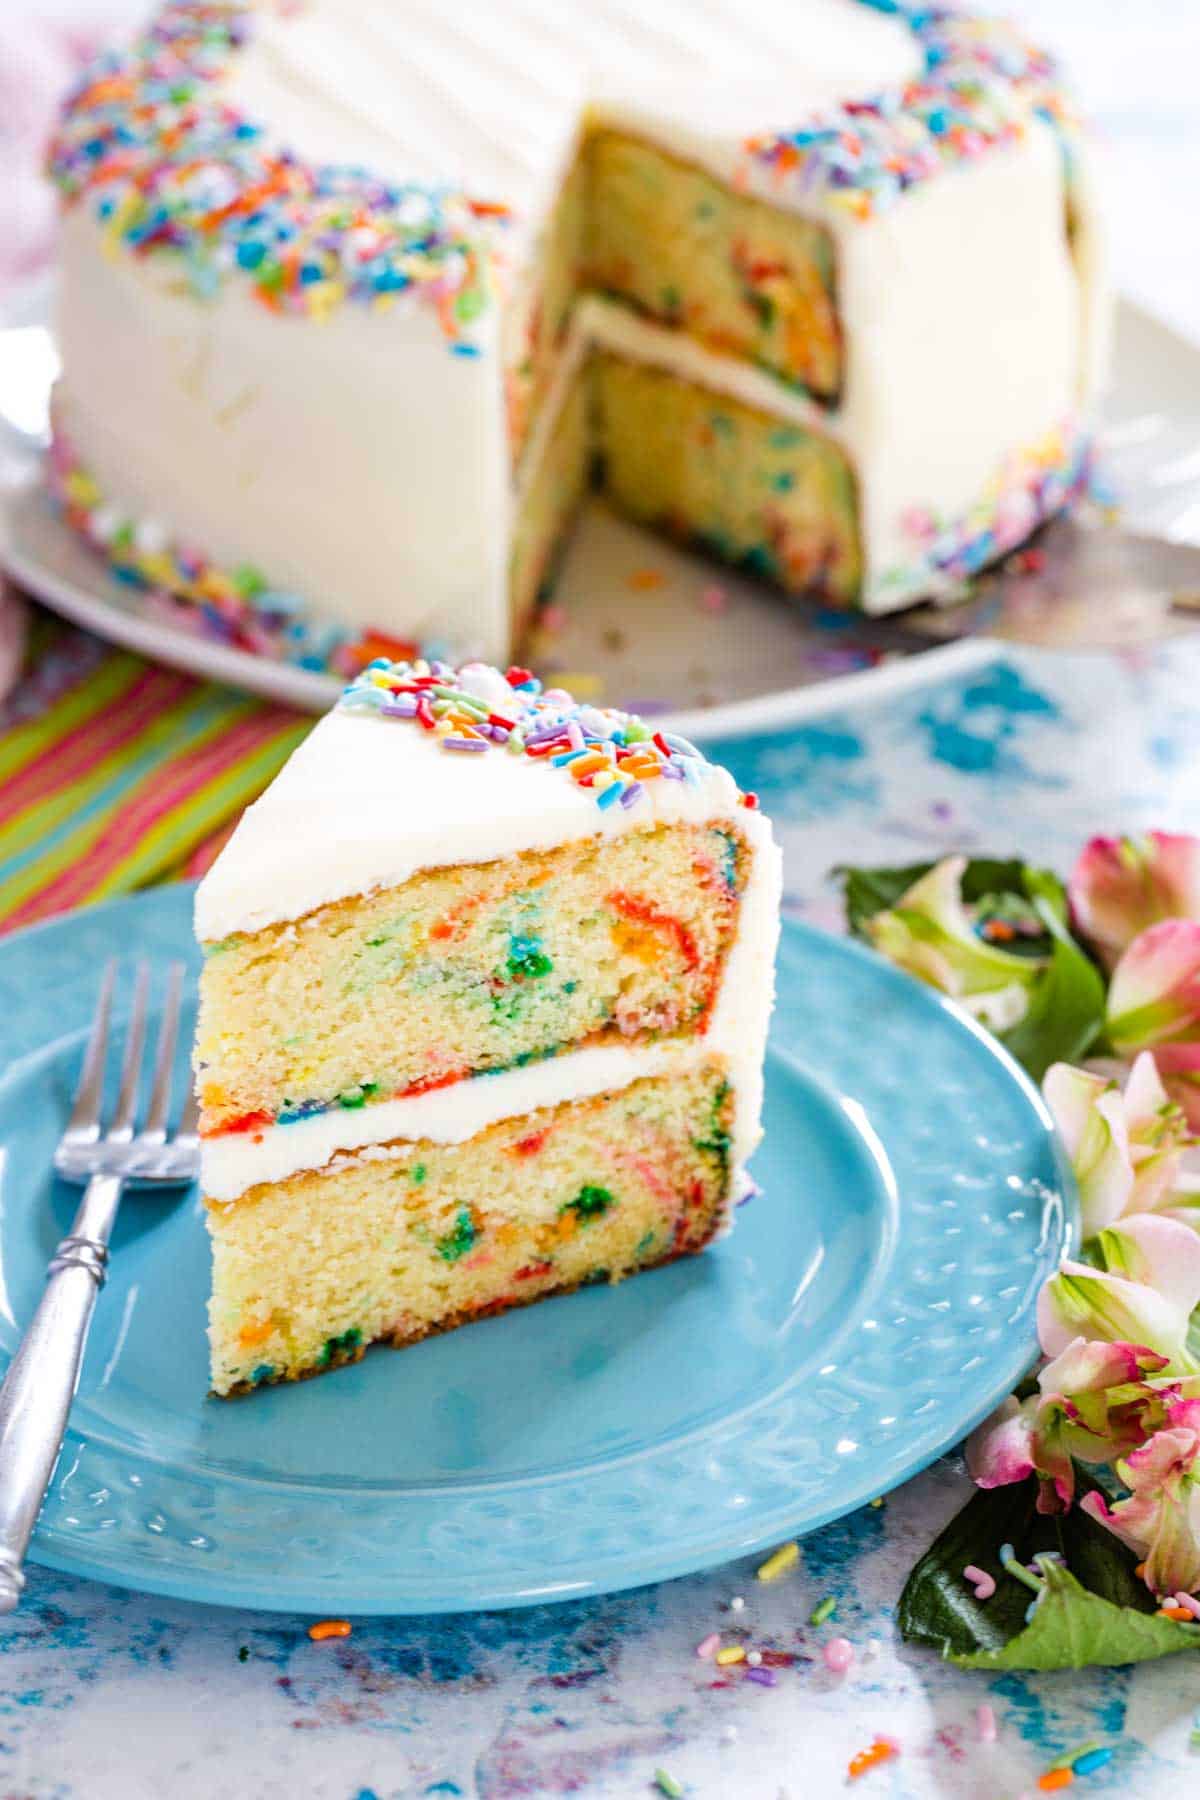 A slice of gluten free funfetti cake on a blue plate next to a fork, with the whole cake in the background.